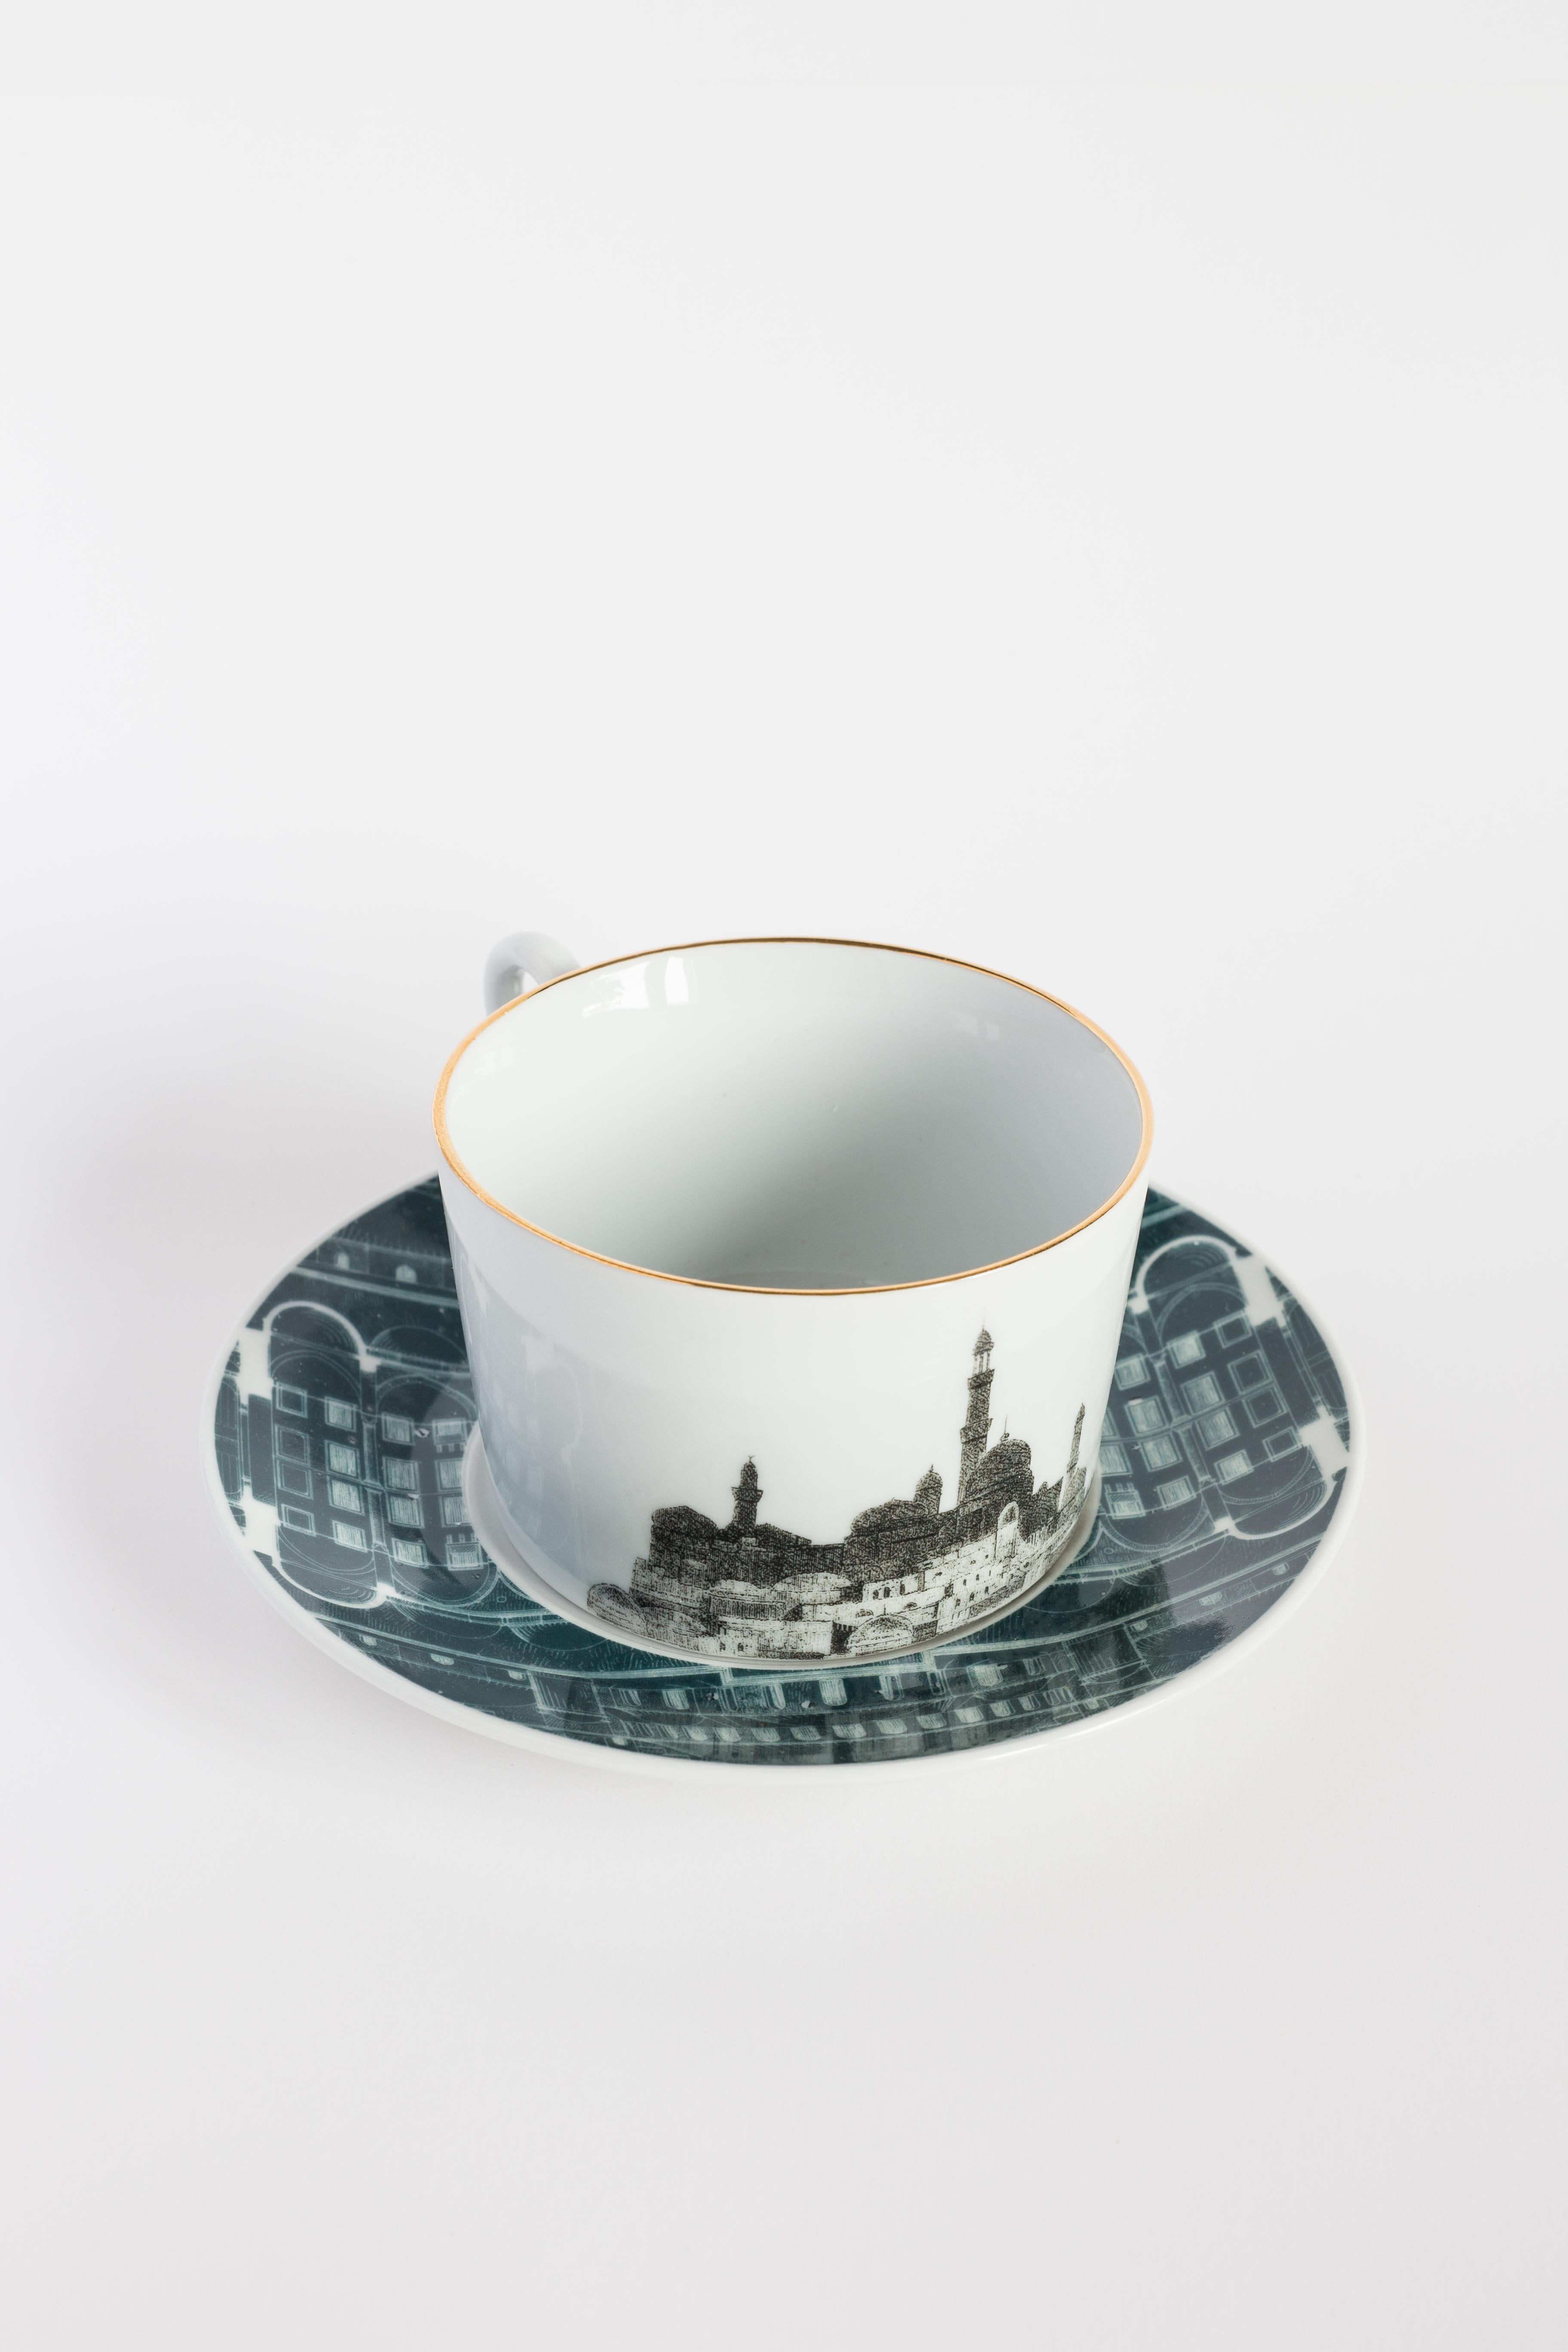 In Lebanon collection a different landscape depicts the local coasts, ruins, and architecture in black and white, with a sophisticated rim decoration that showcases blueprints of traditional buildings.
Tea set with 6 coffee cups and plates.